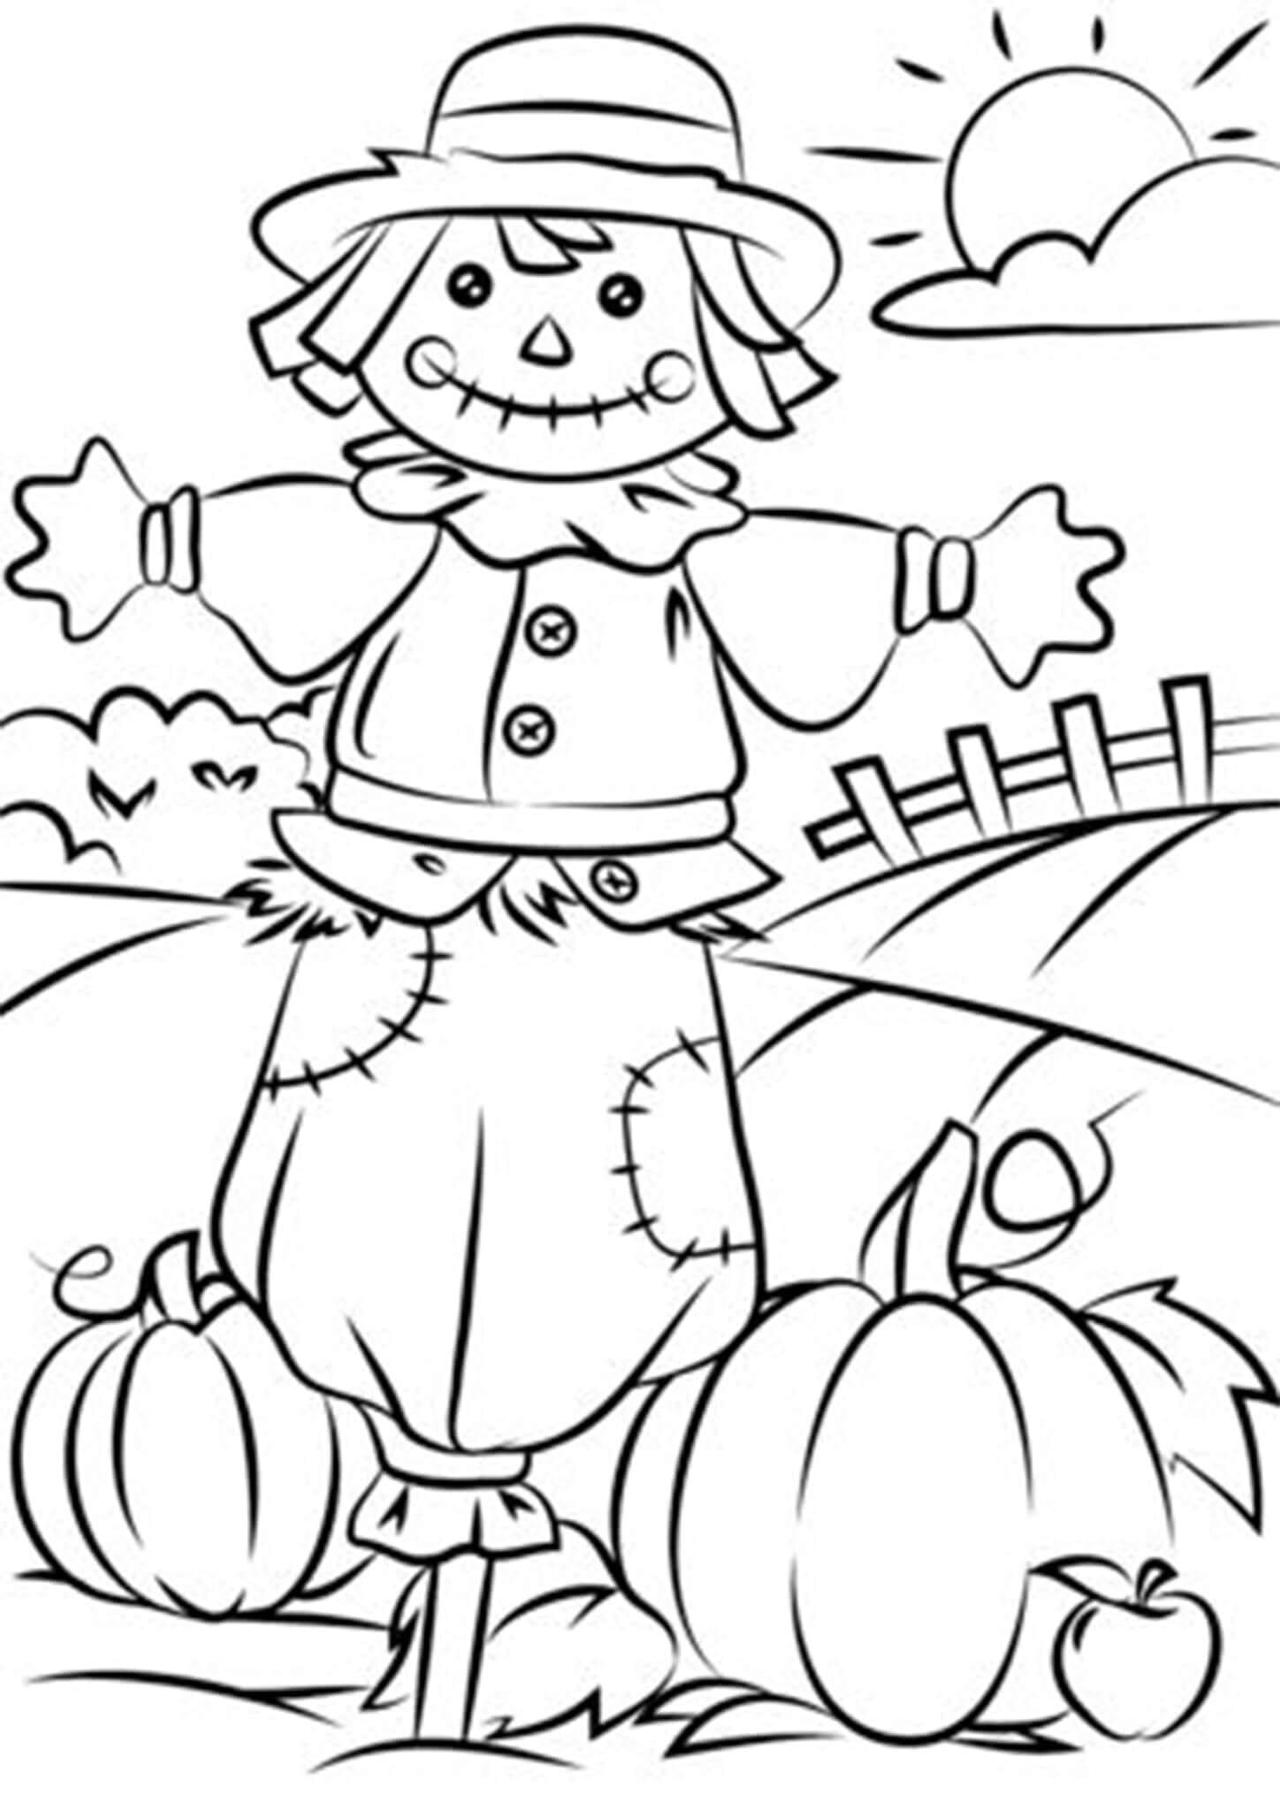 Scarecrow coloring pages by coloringpageswk on